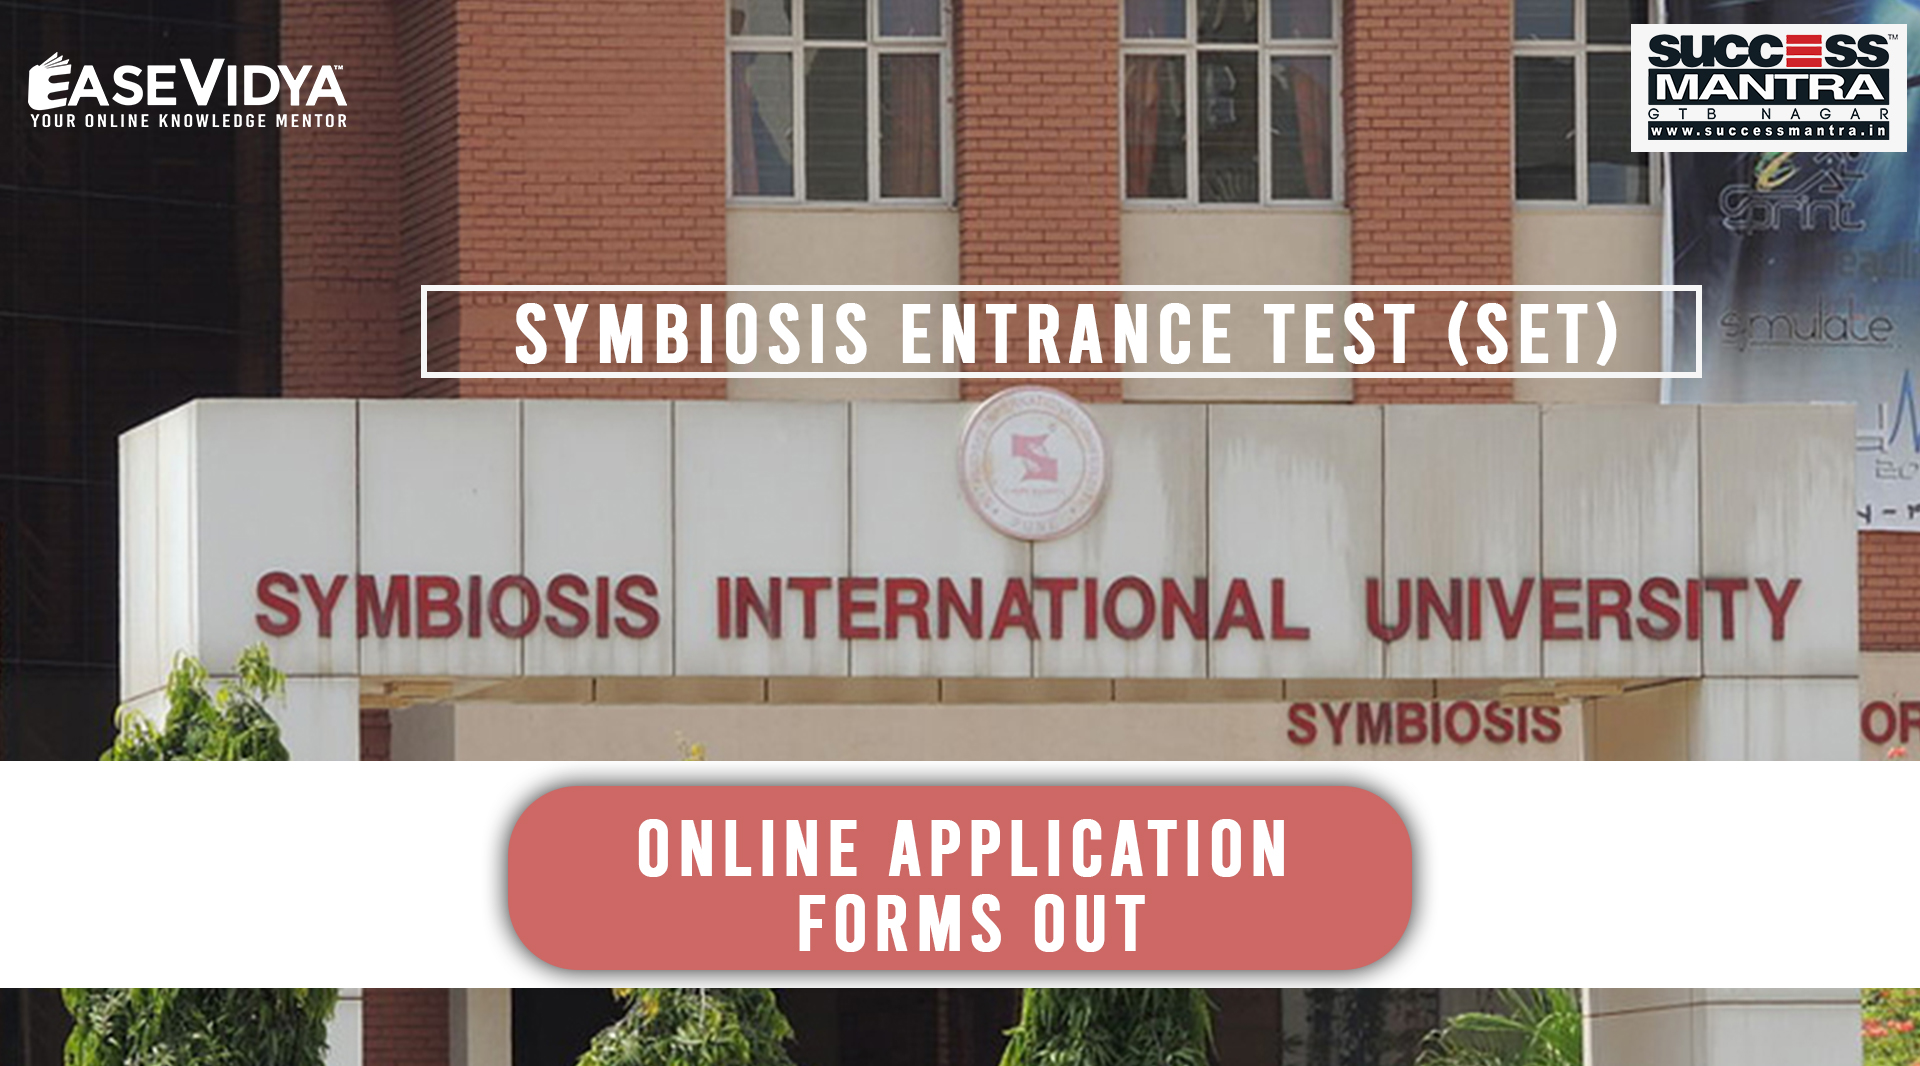 Symbiosis Entrance Test (Set) Application Forms Out And Applicable For BBA, BBA IT, BCA, B SC In Culinary Arts, BA In Media N Communication, symbiosis law school pune, symbiosis law school Noida, symbiosis law school Hyderabad, symbiosis law school Nagpur, www.set-test.org 2022 , set ishinfo, slat symbiosis, symbiosis 2022, symbiosis college Pune admission 2022, symbiosis admission, siteee 2022, success mantra coaching institute for management courses like BBA, BBA IT, BCA, B.SC. HOTEL MANAGEMENT, LAW, LLB, BA LLB, LLB INTEGRATED COURSE